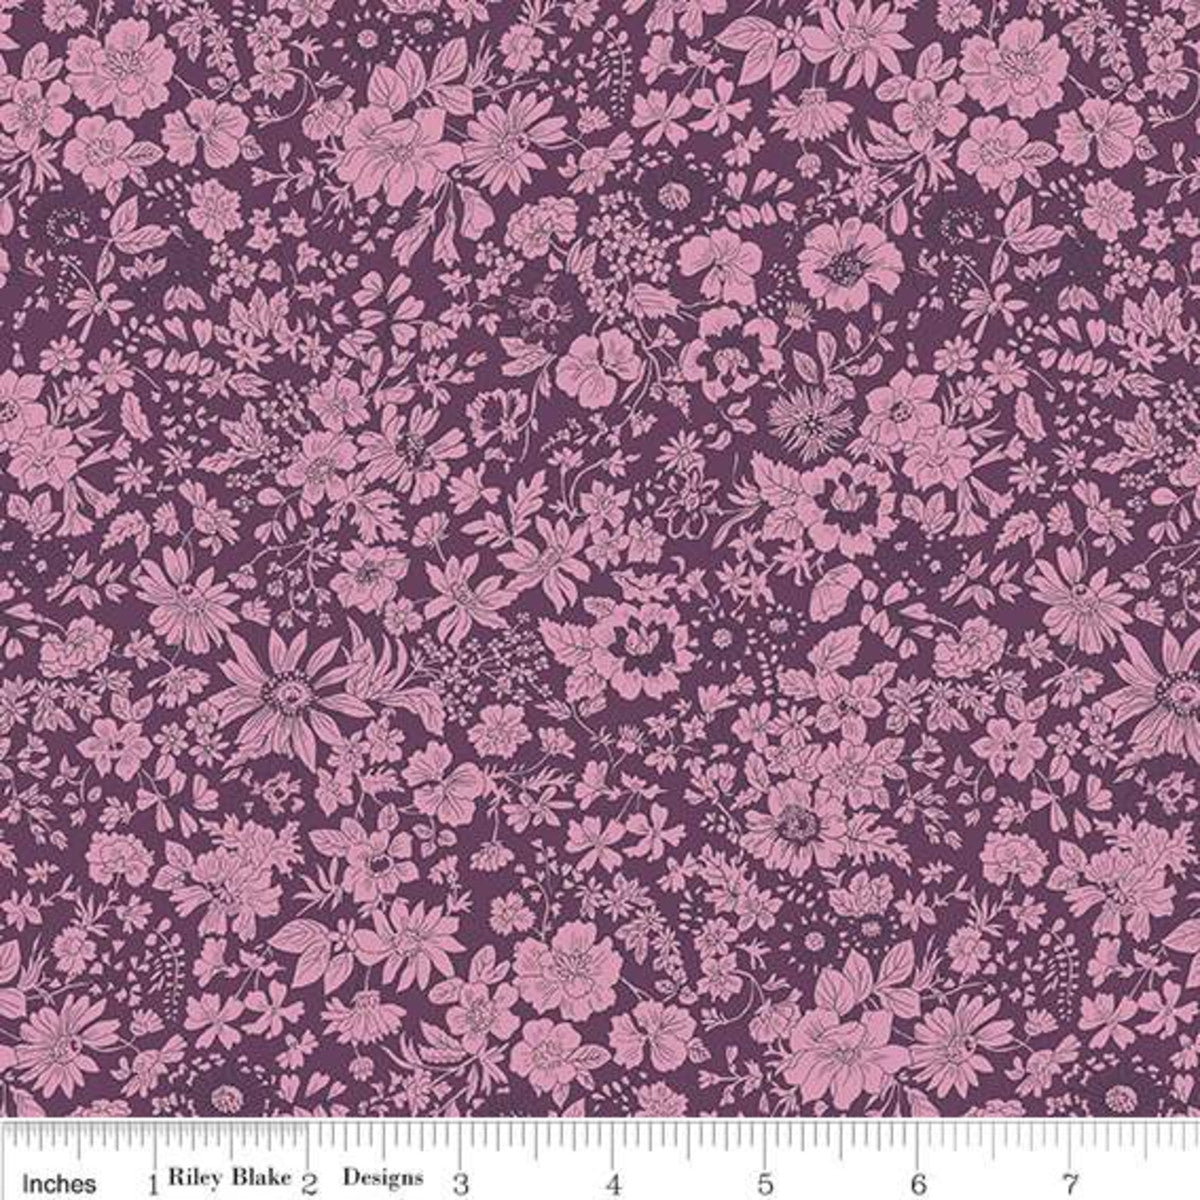 Emily Silhouette Flower Purple - The Flower Show Midnight Garden Collection - Liberty Cotton Fabric ✂️ £10 pm *SALE*